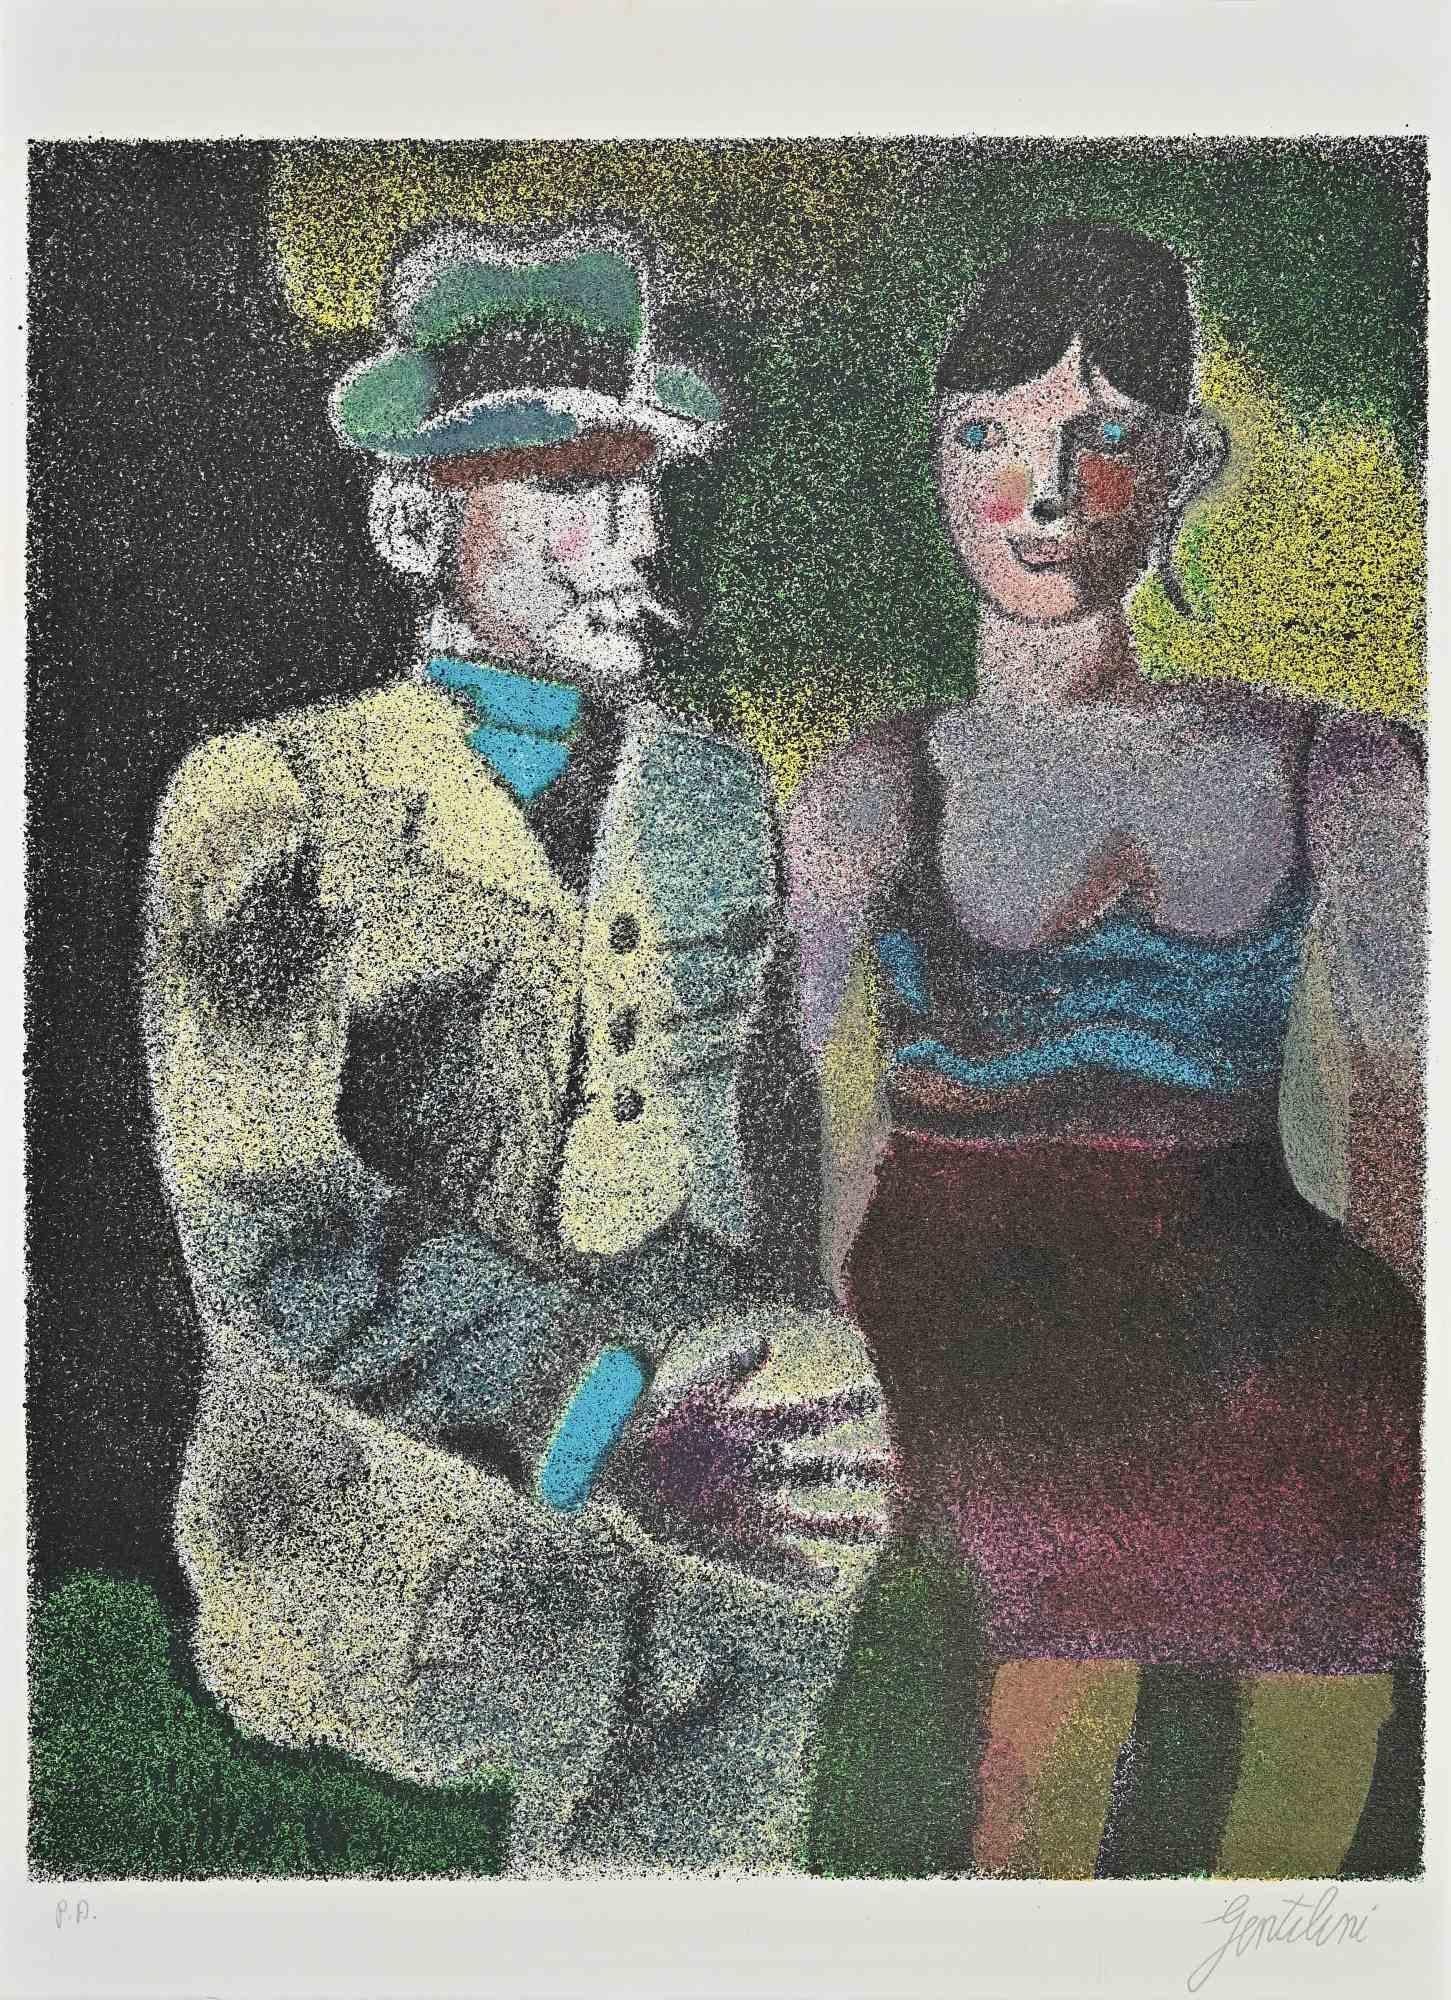 Couple is a Lithograph realized by Franco Gentilini (Italian Painter, 1909-1981) in the 1970s.

The state of preservation of the artwork is excellent.

Hand-signed.

Artist's proof.

Franco Gentilini ( Italian Painter, 1909-1981): Gentilini's